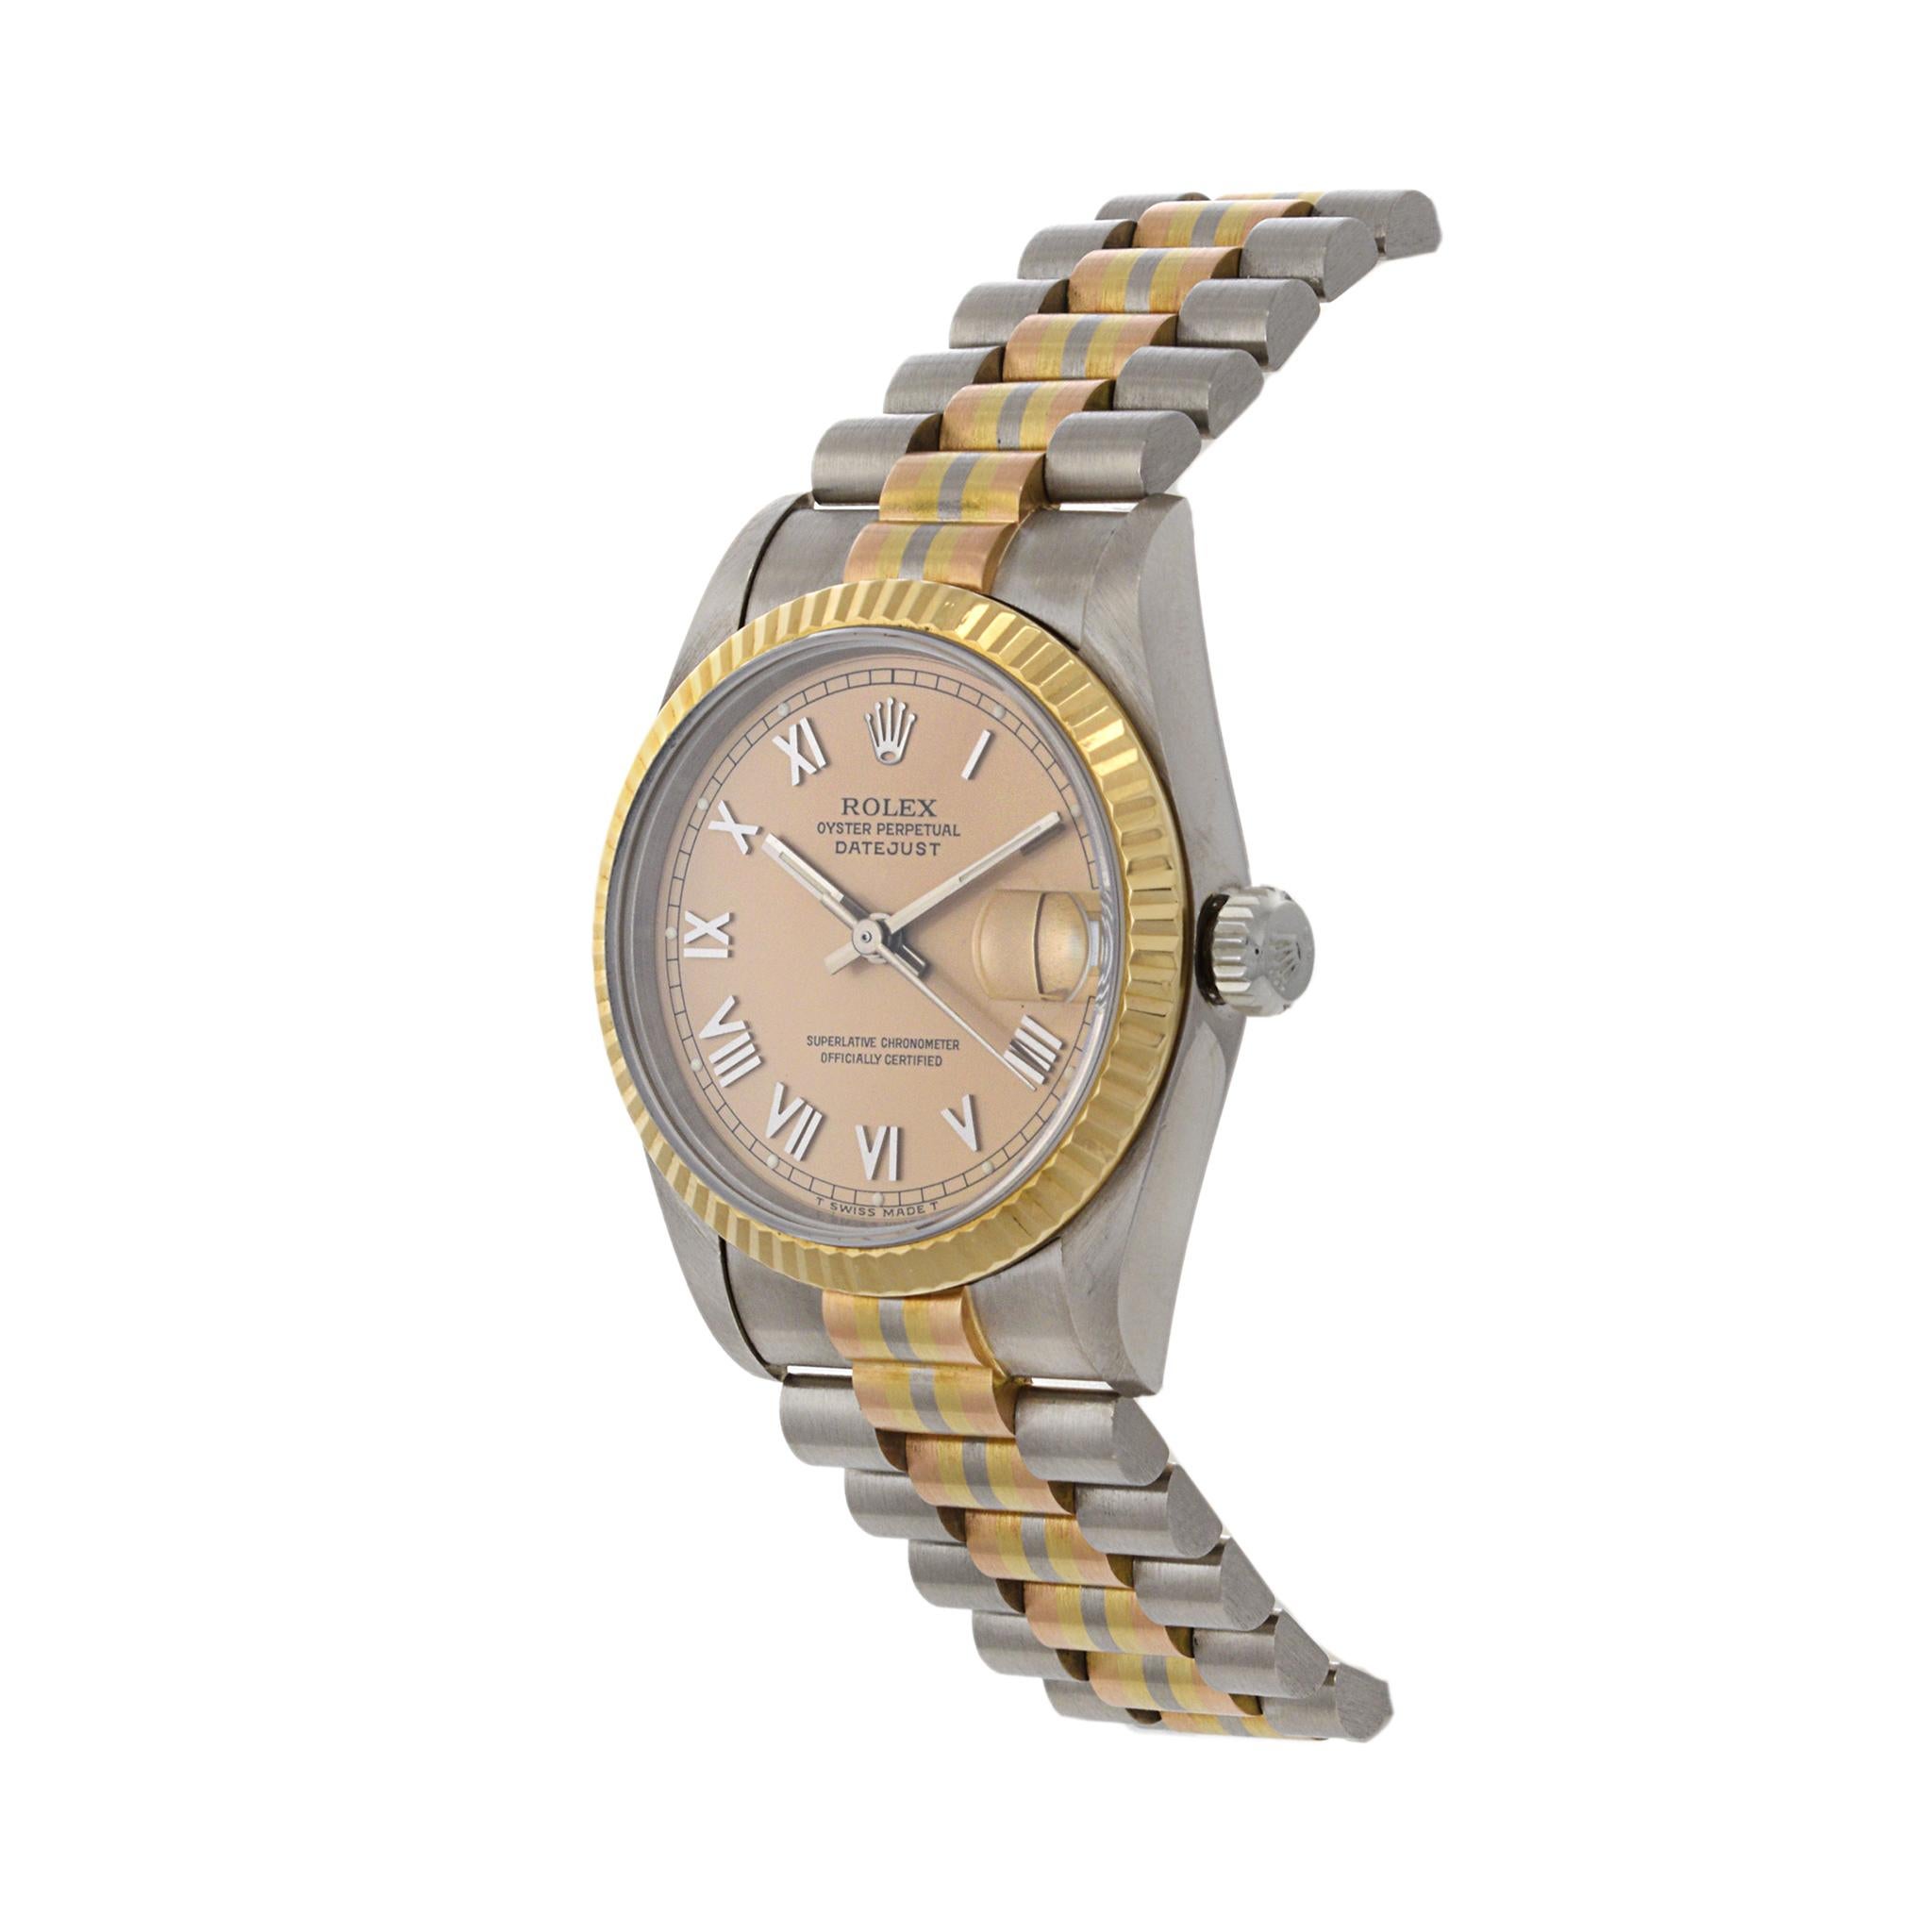 Retro Rolex Datejust 31 Tridor 18K Yellow, White, and Rose Gold For Sale